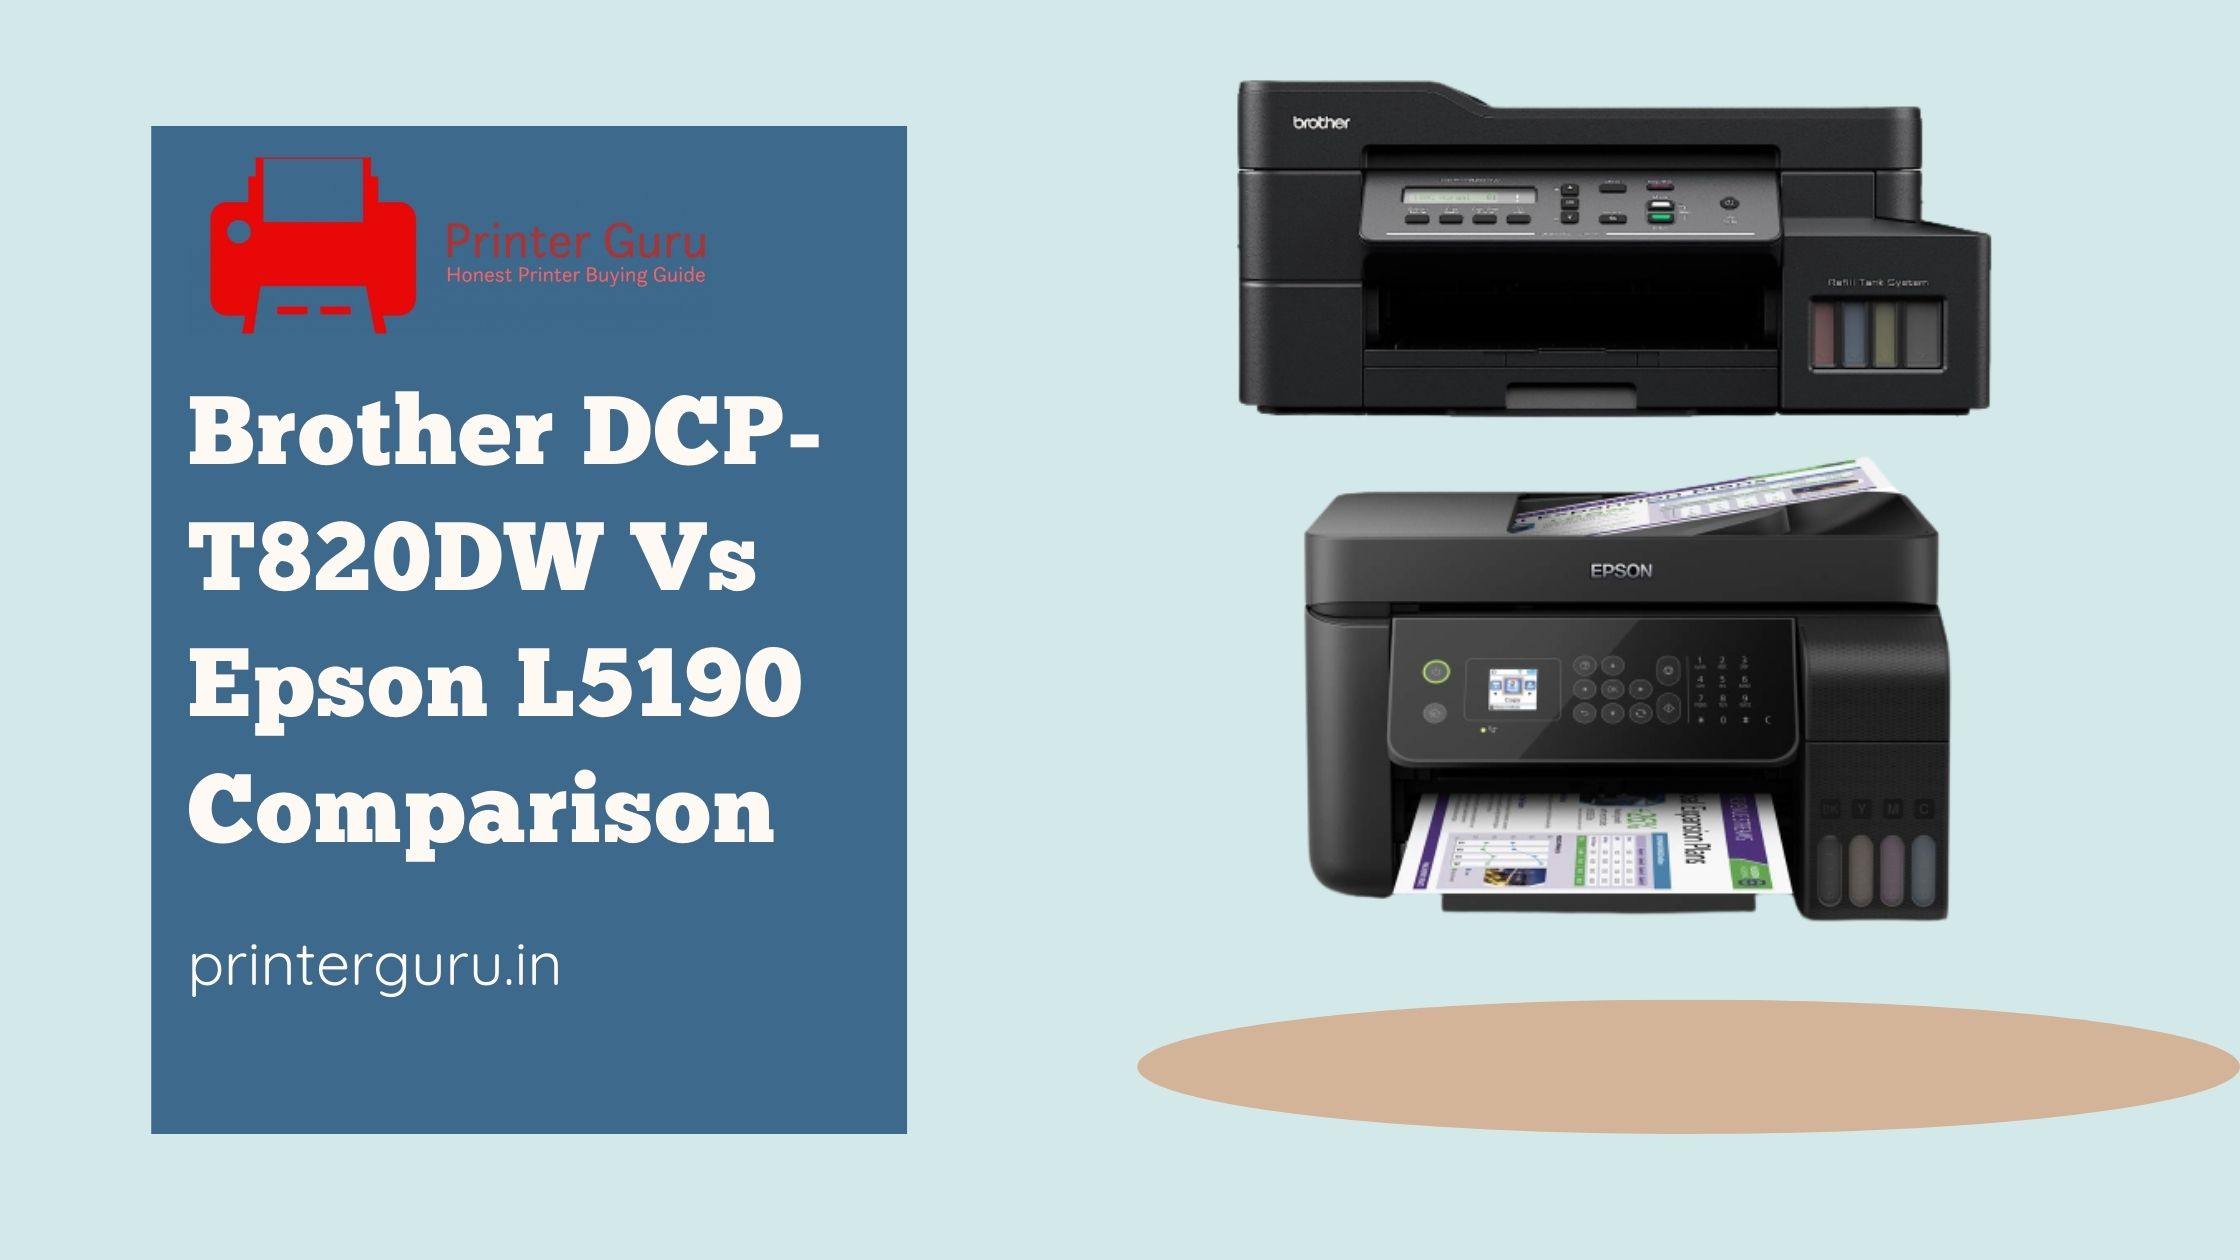 Brother DCP-T820DW Vs Epson L5190